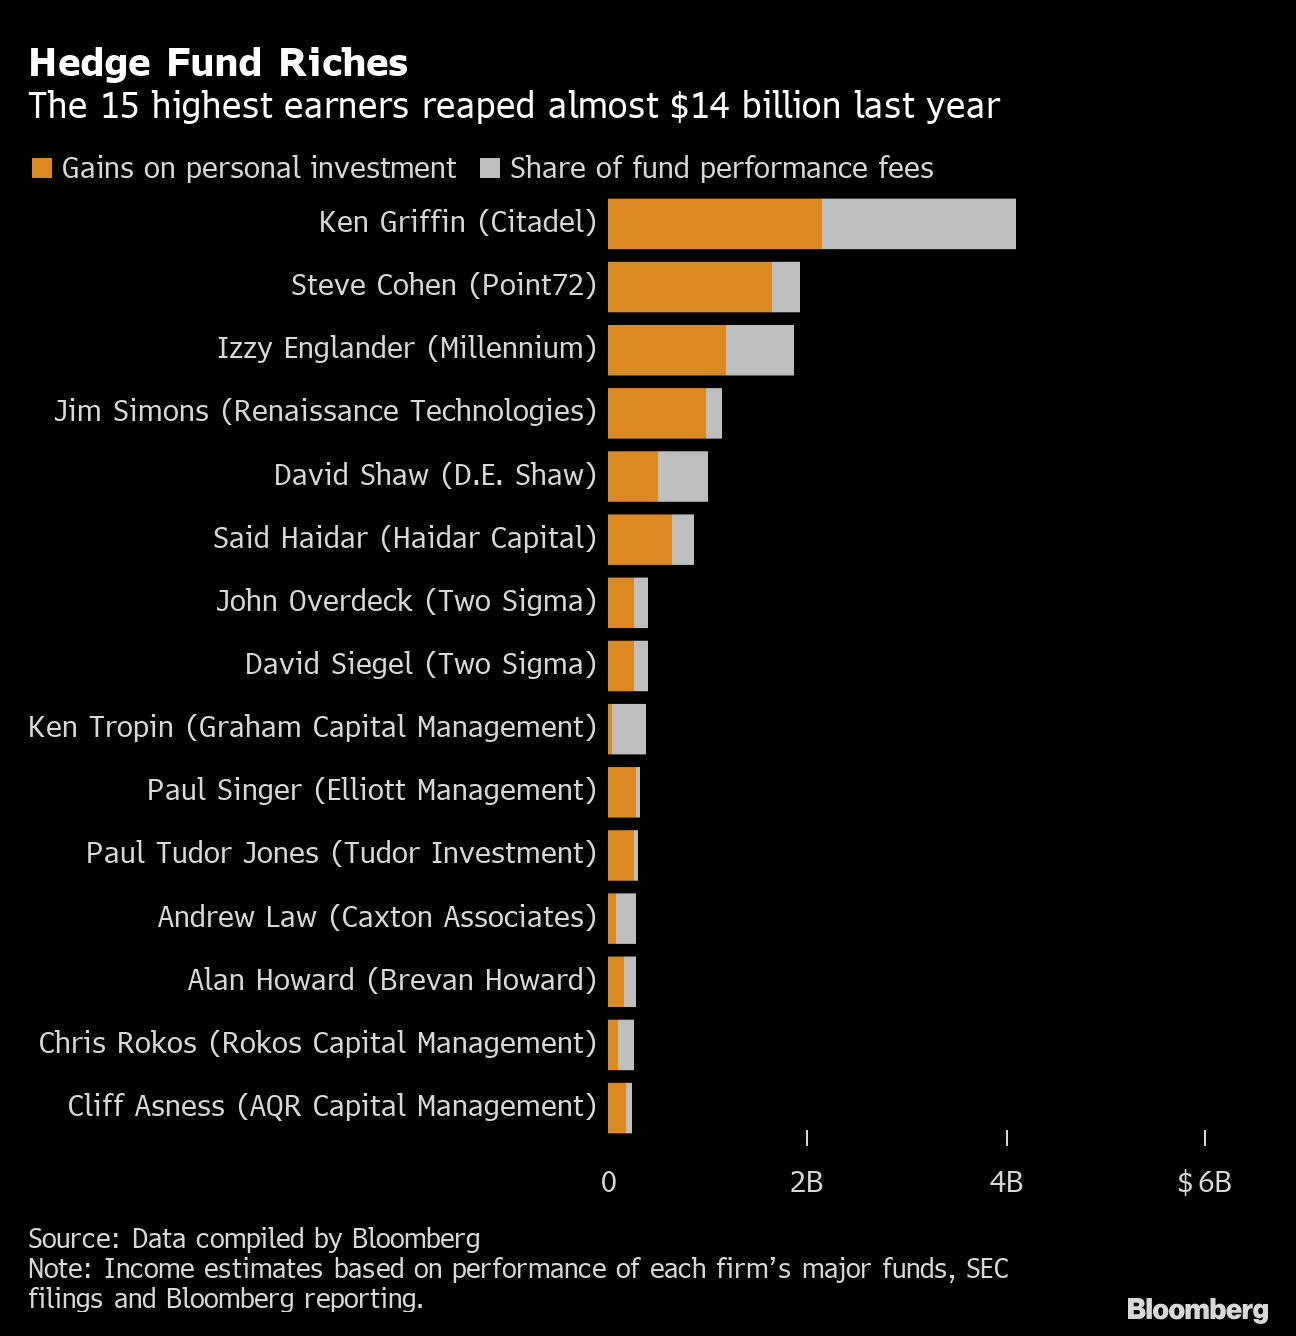 LesserKnown Hedge Fund Boss Joins Ranks of Best Paid With 193 Gain